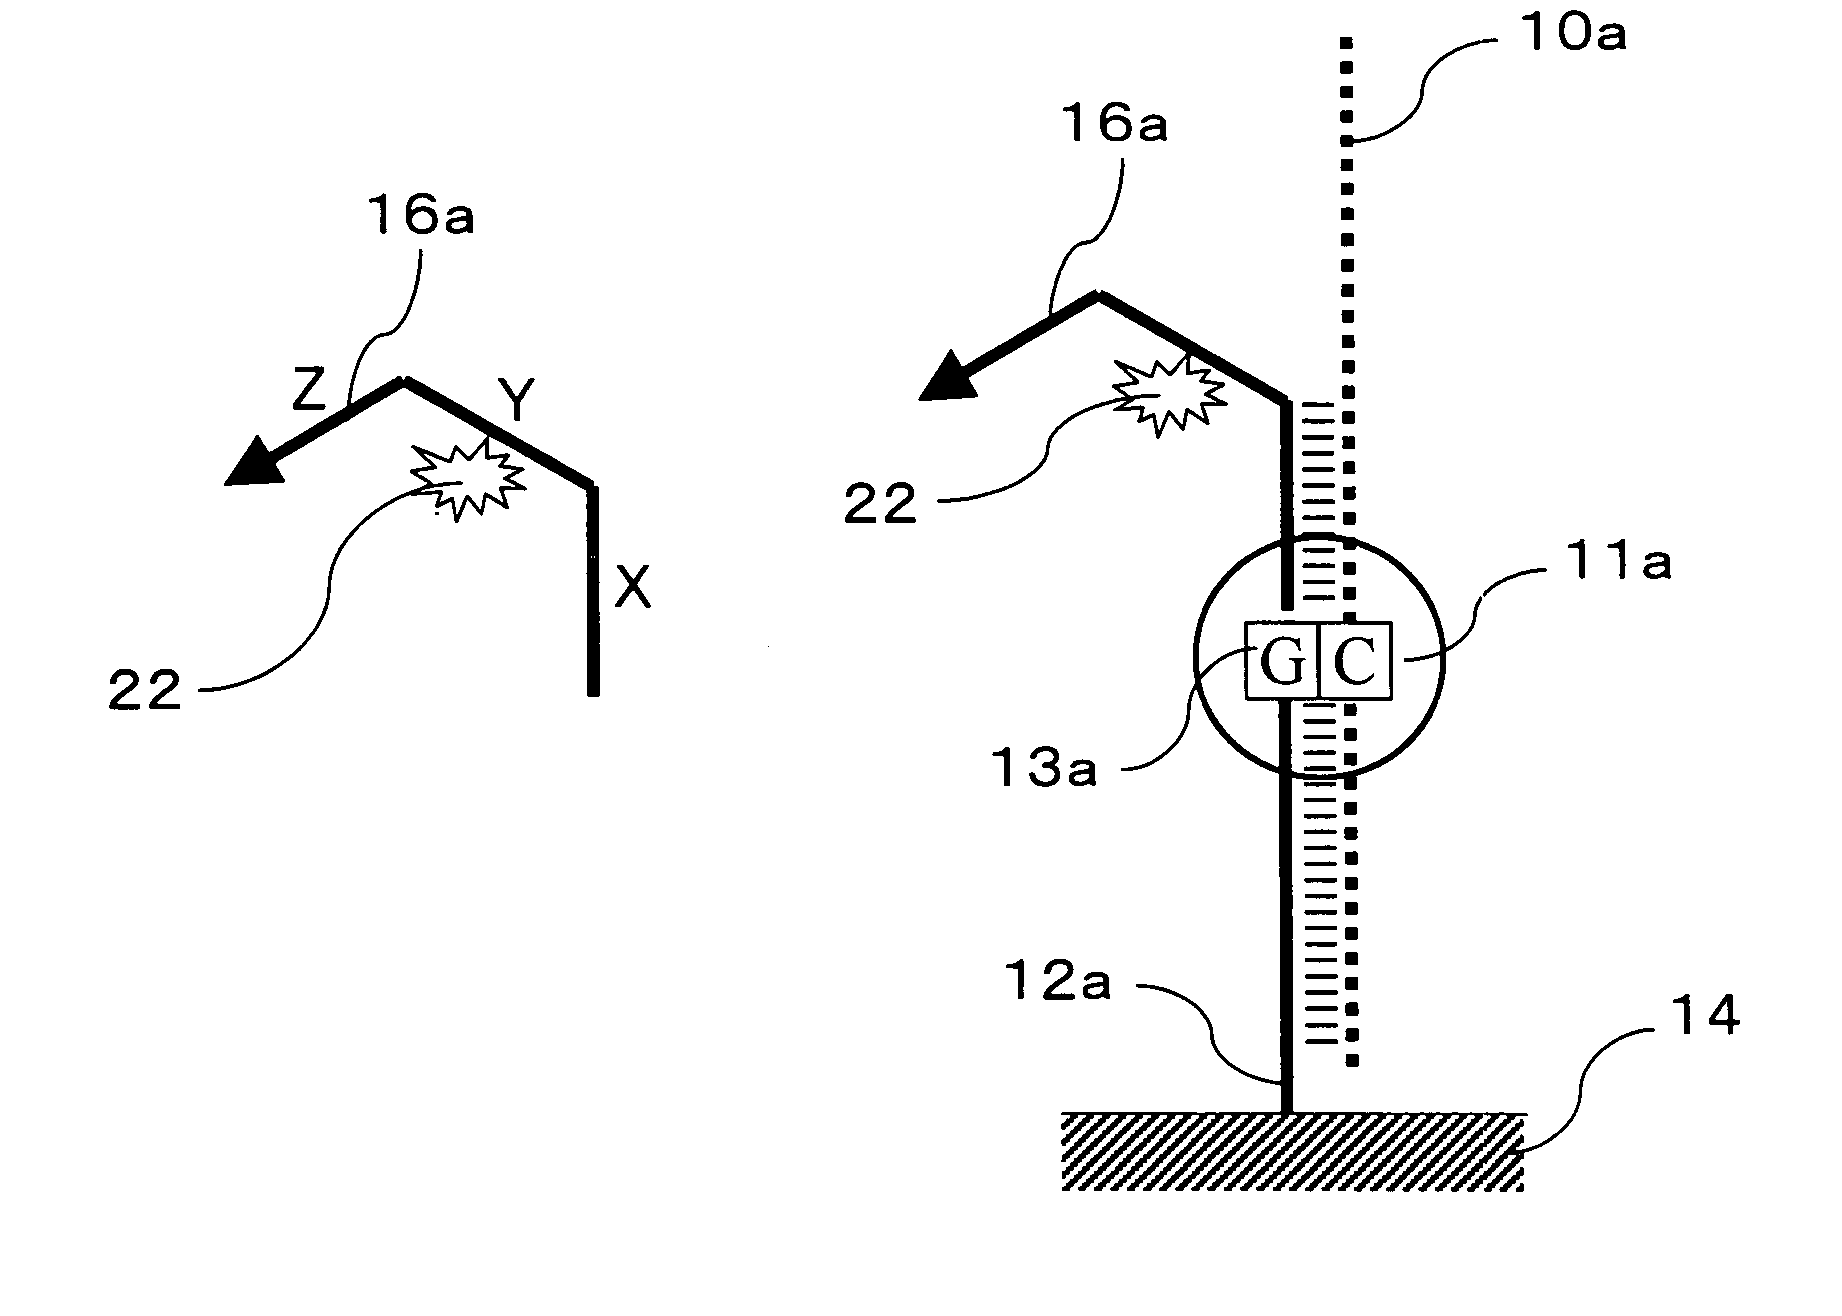 Signal amplification method for detecting mutated gene